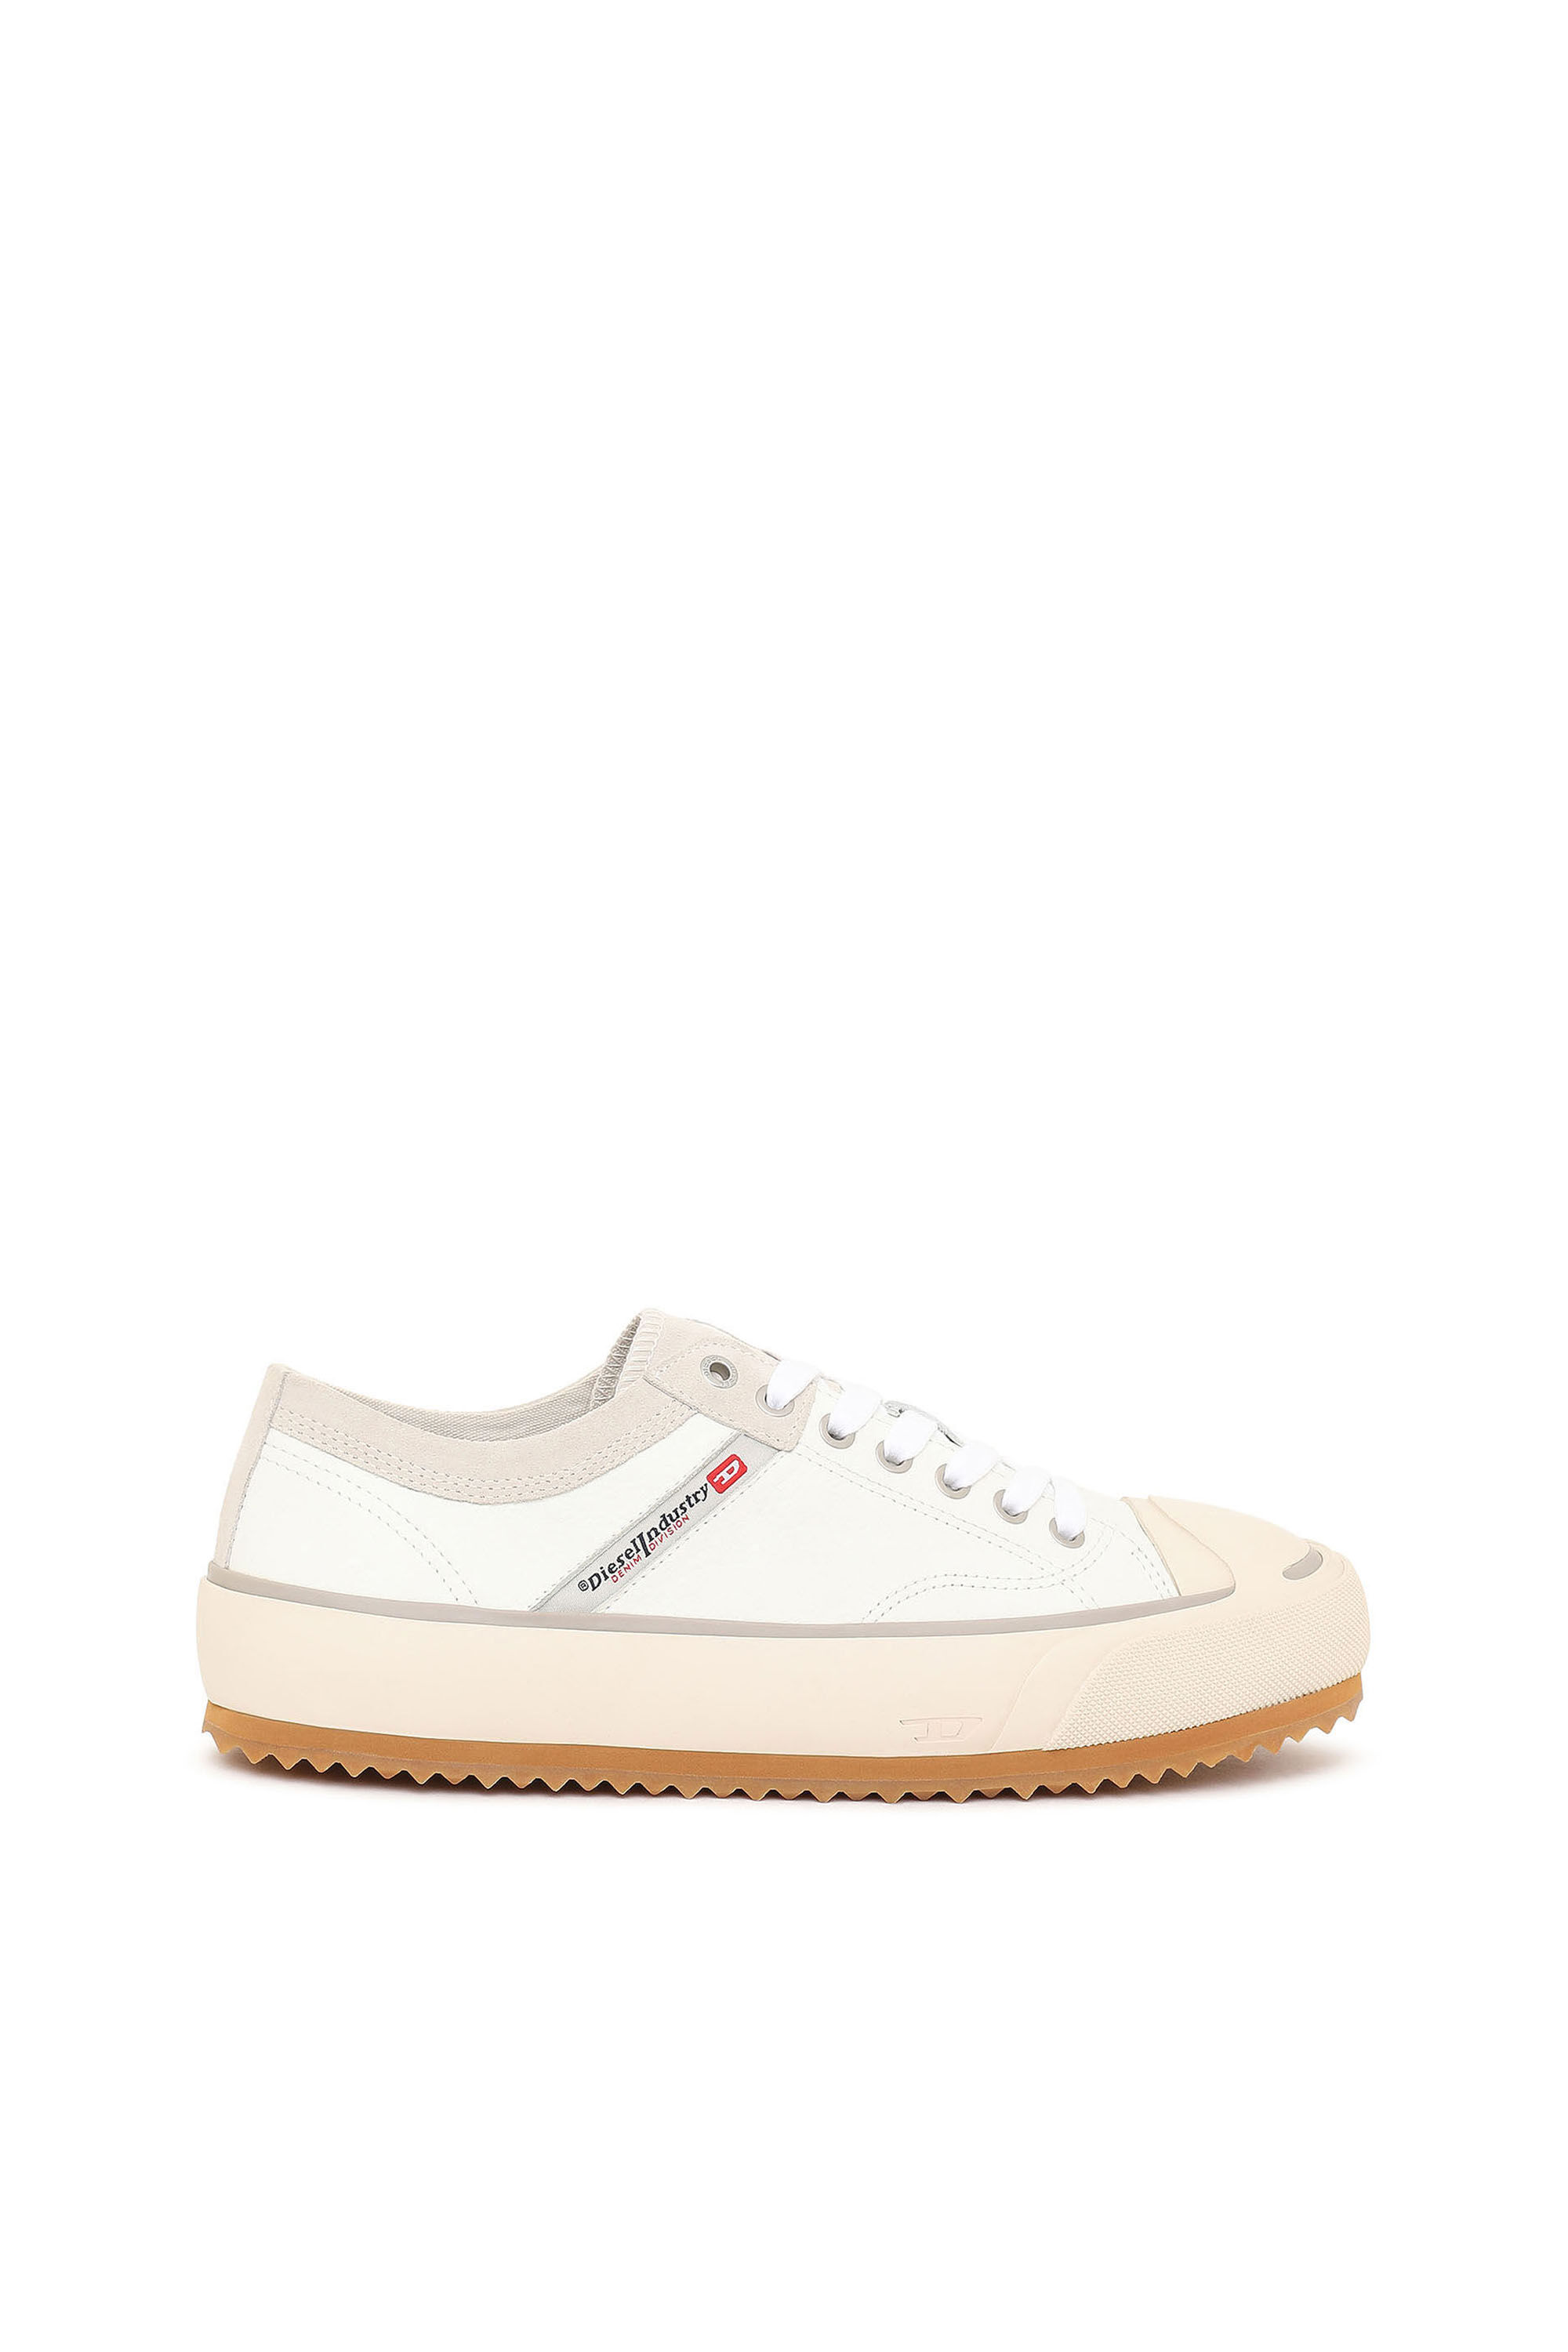 S-PRINCIPIA LOW X Unisex: Sneakers in leather and suede | Diesel